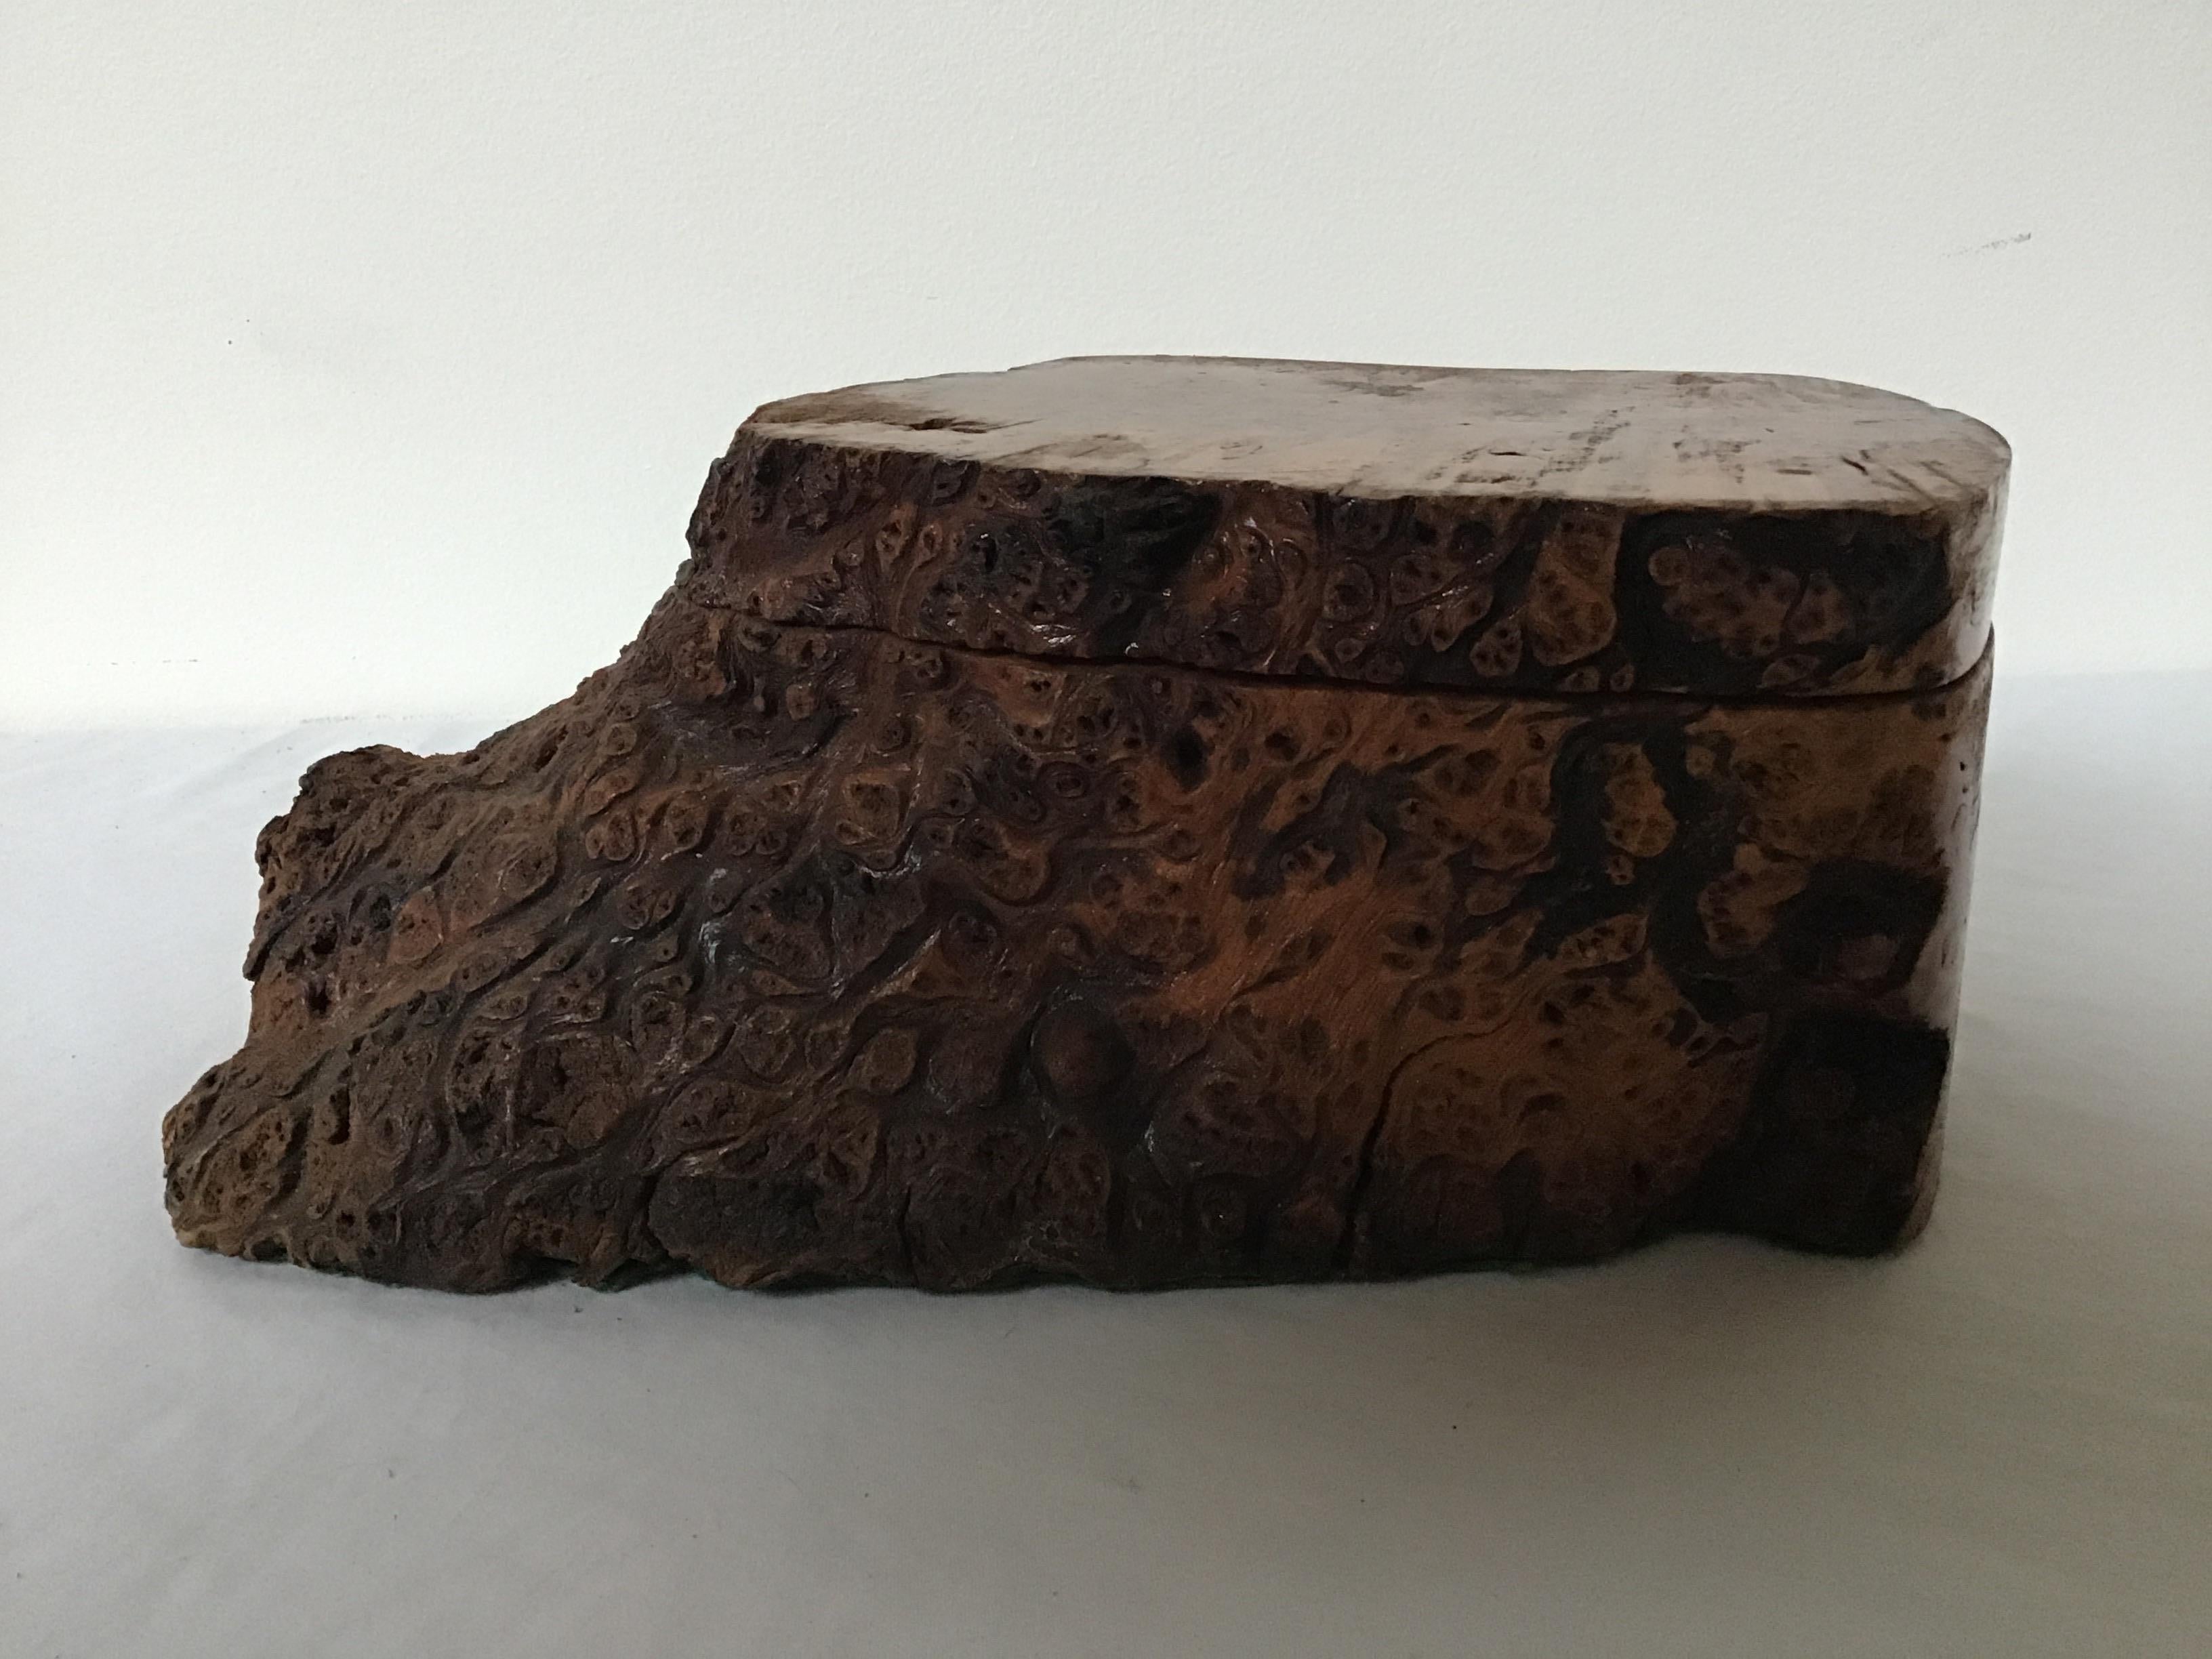 how is burl wood formed